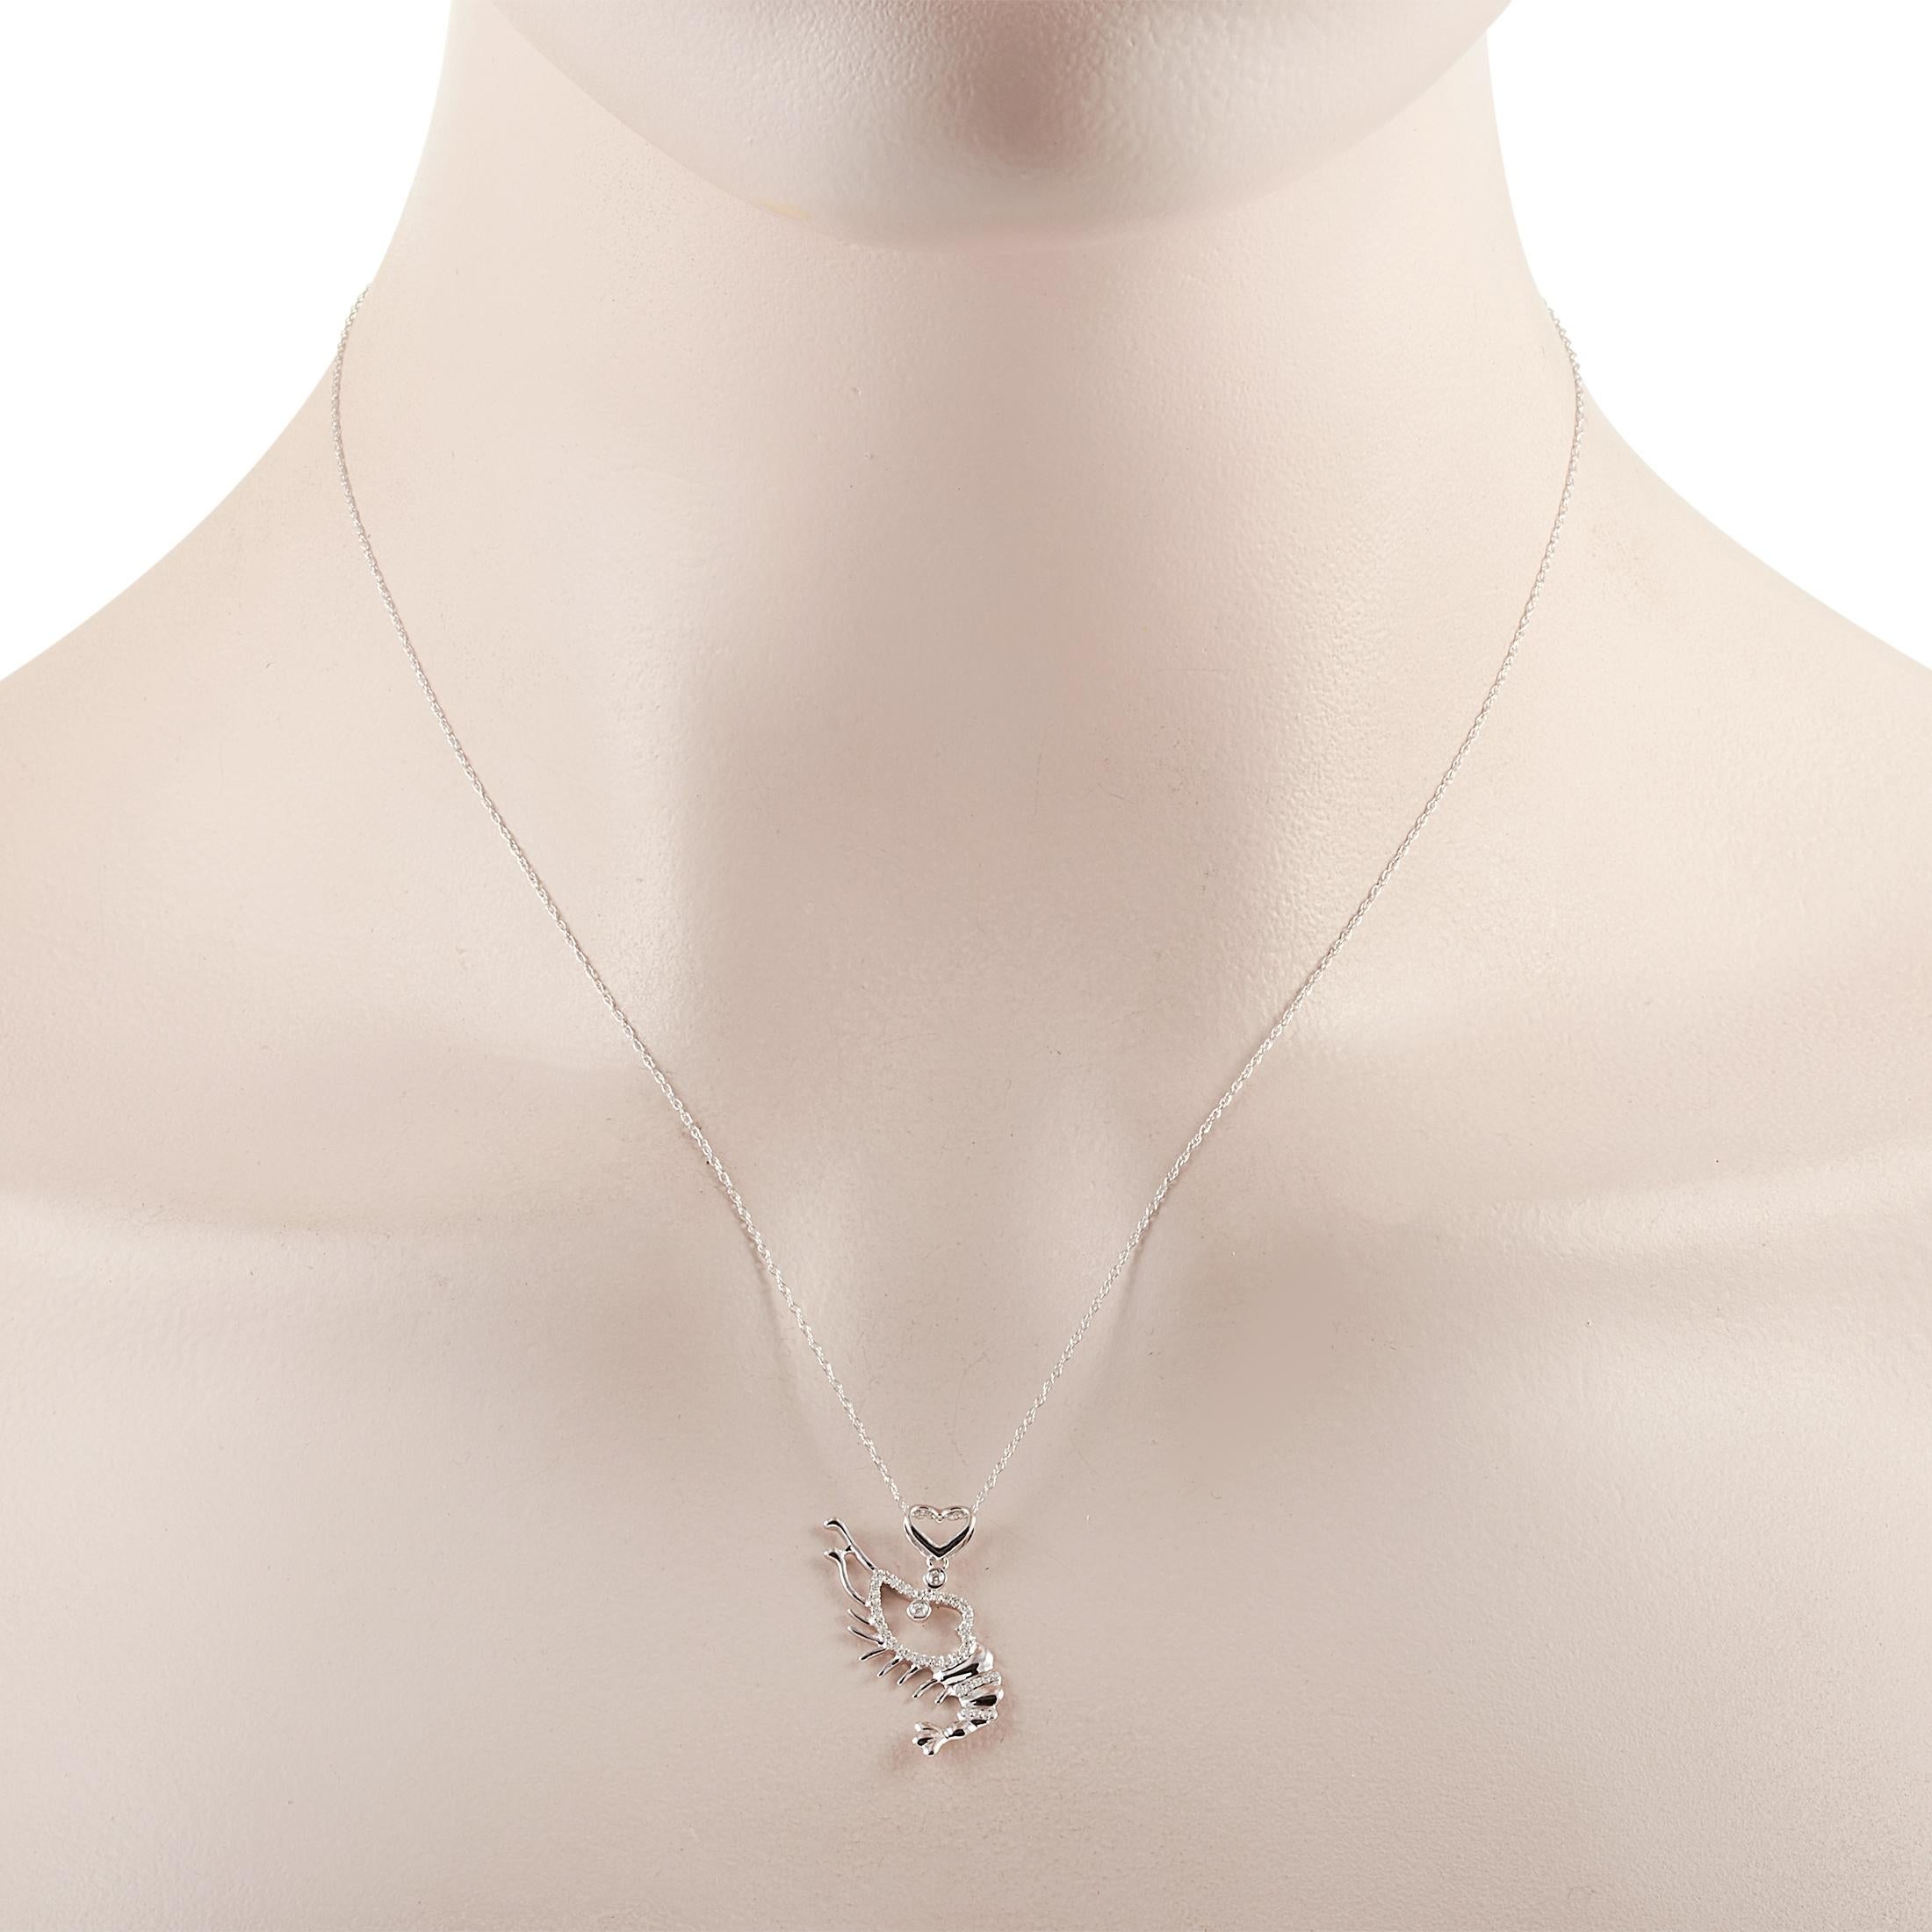 This LB Exclusive necklace is made of 14K white gold and embellished with diamonds that amount to 0.14 carats. The necklace weighs 1.9 grams and boasts a 16” chain and a pendant that measures 1” in length and 0.50” in width.
 
 Offered in brand new